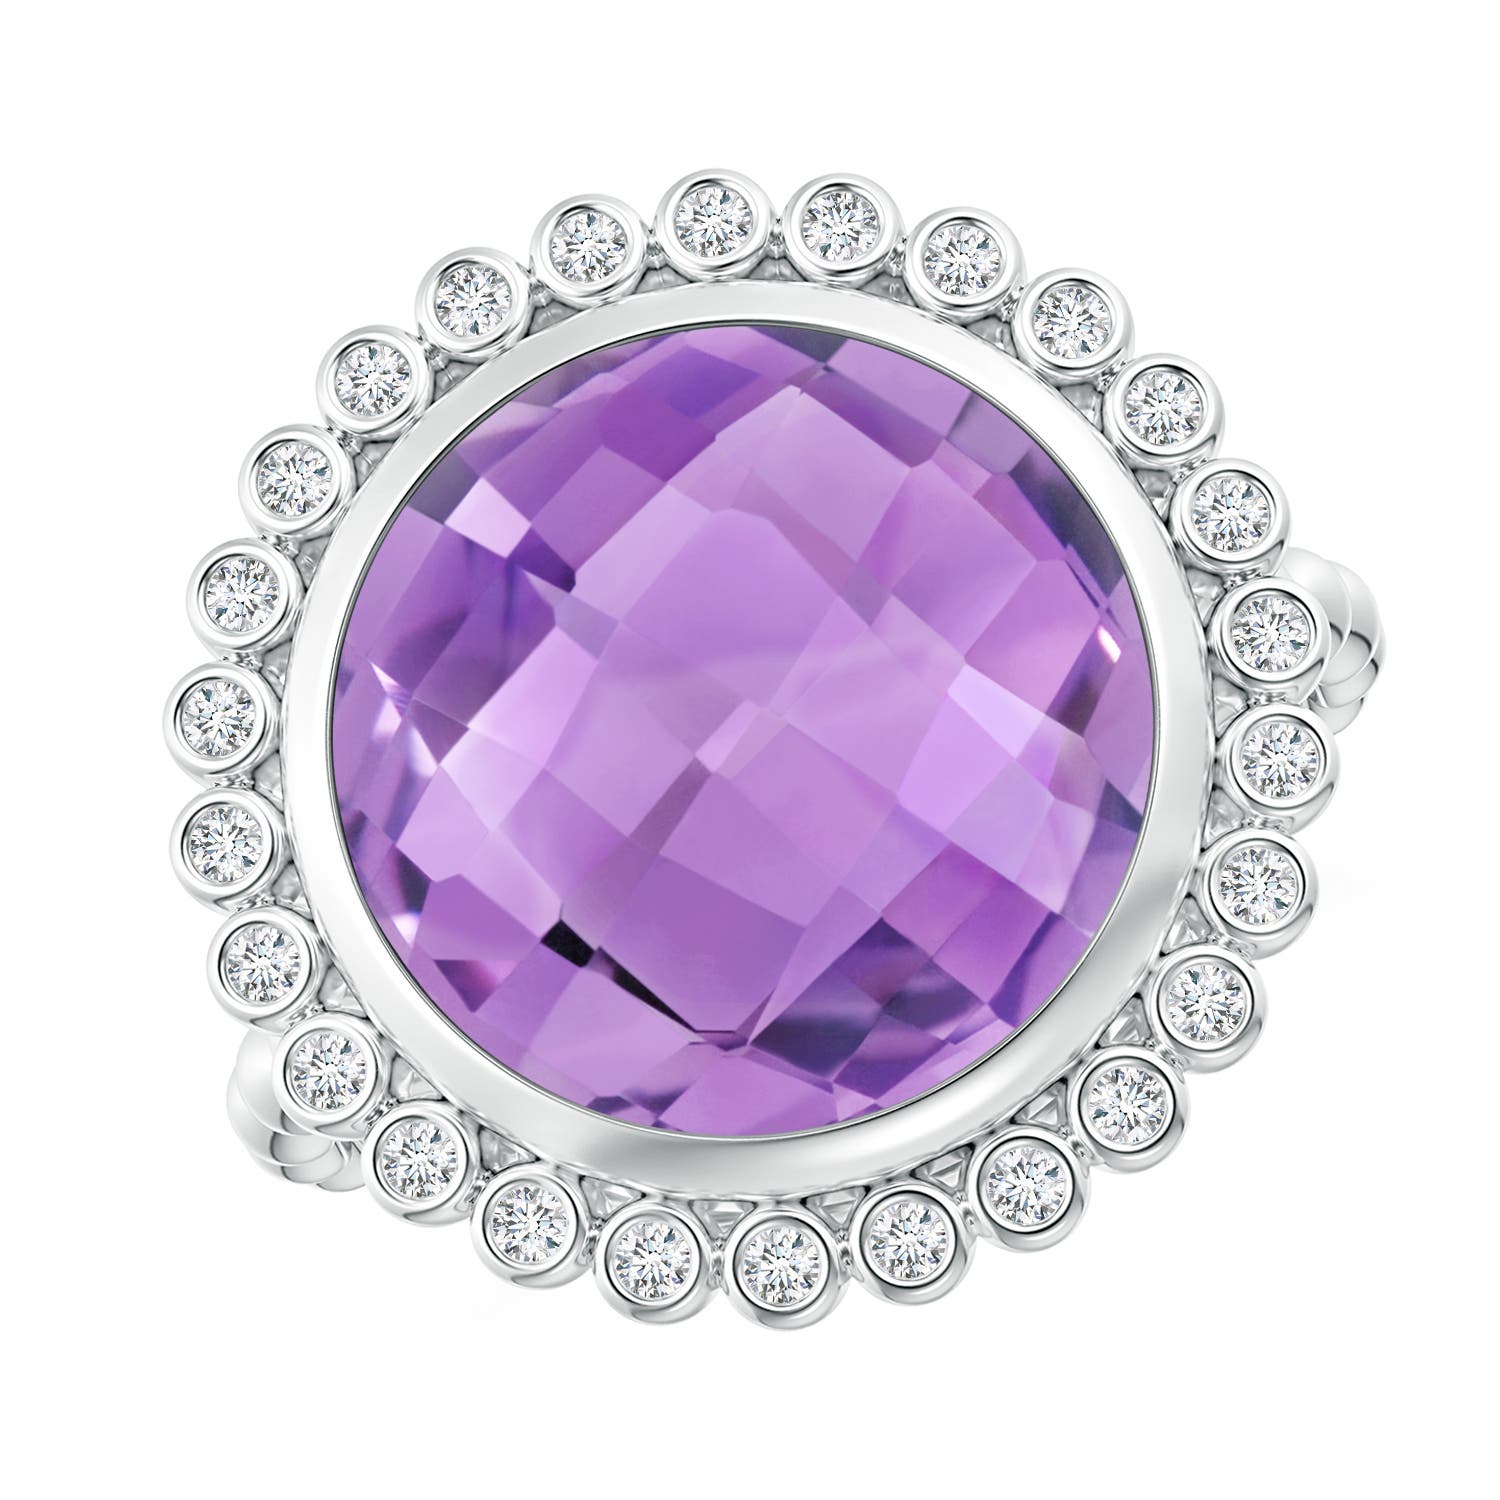 A - Amethyst / 5.71 CT / 14 KT White Gold